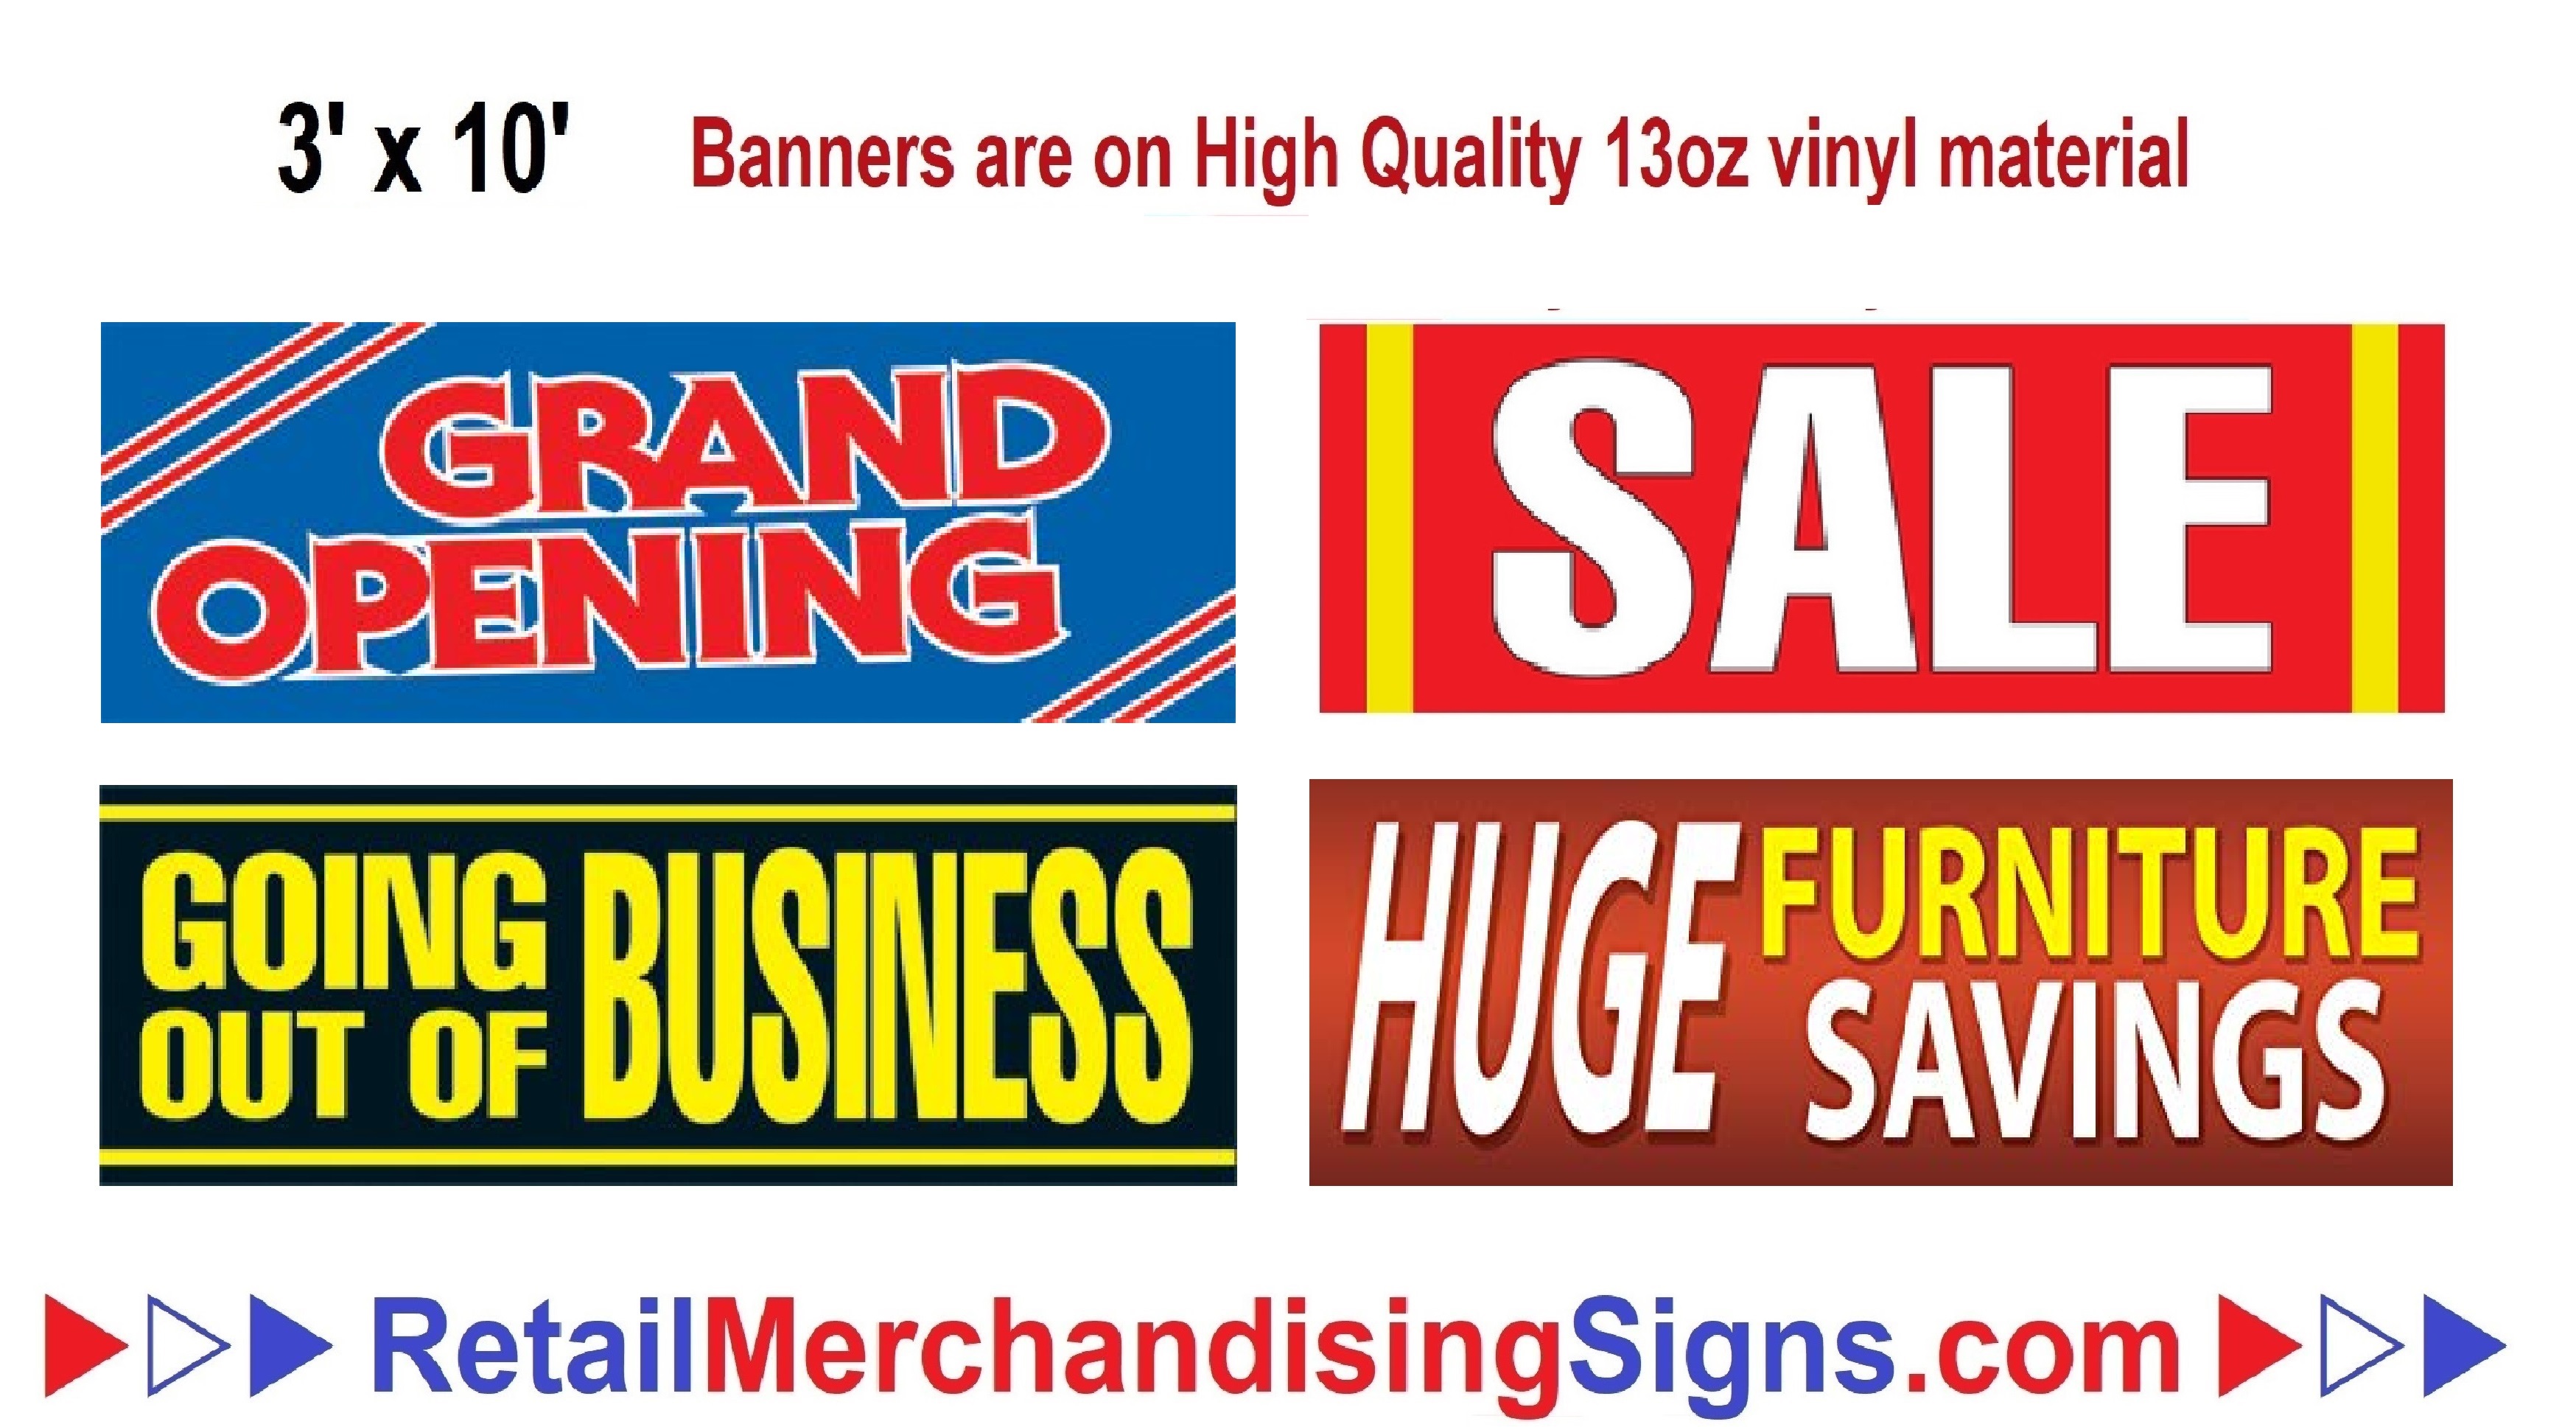 3' x 10' Banners